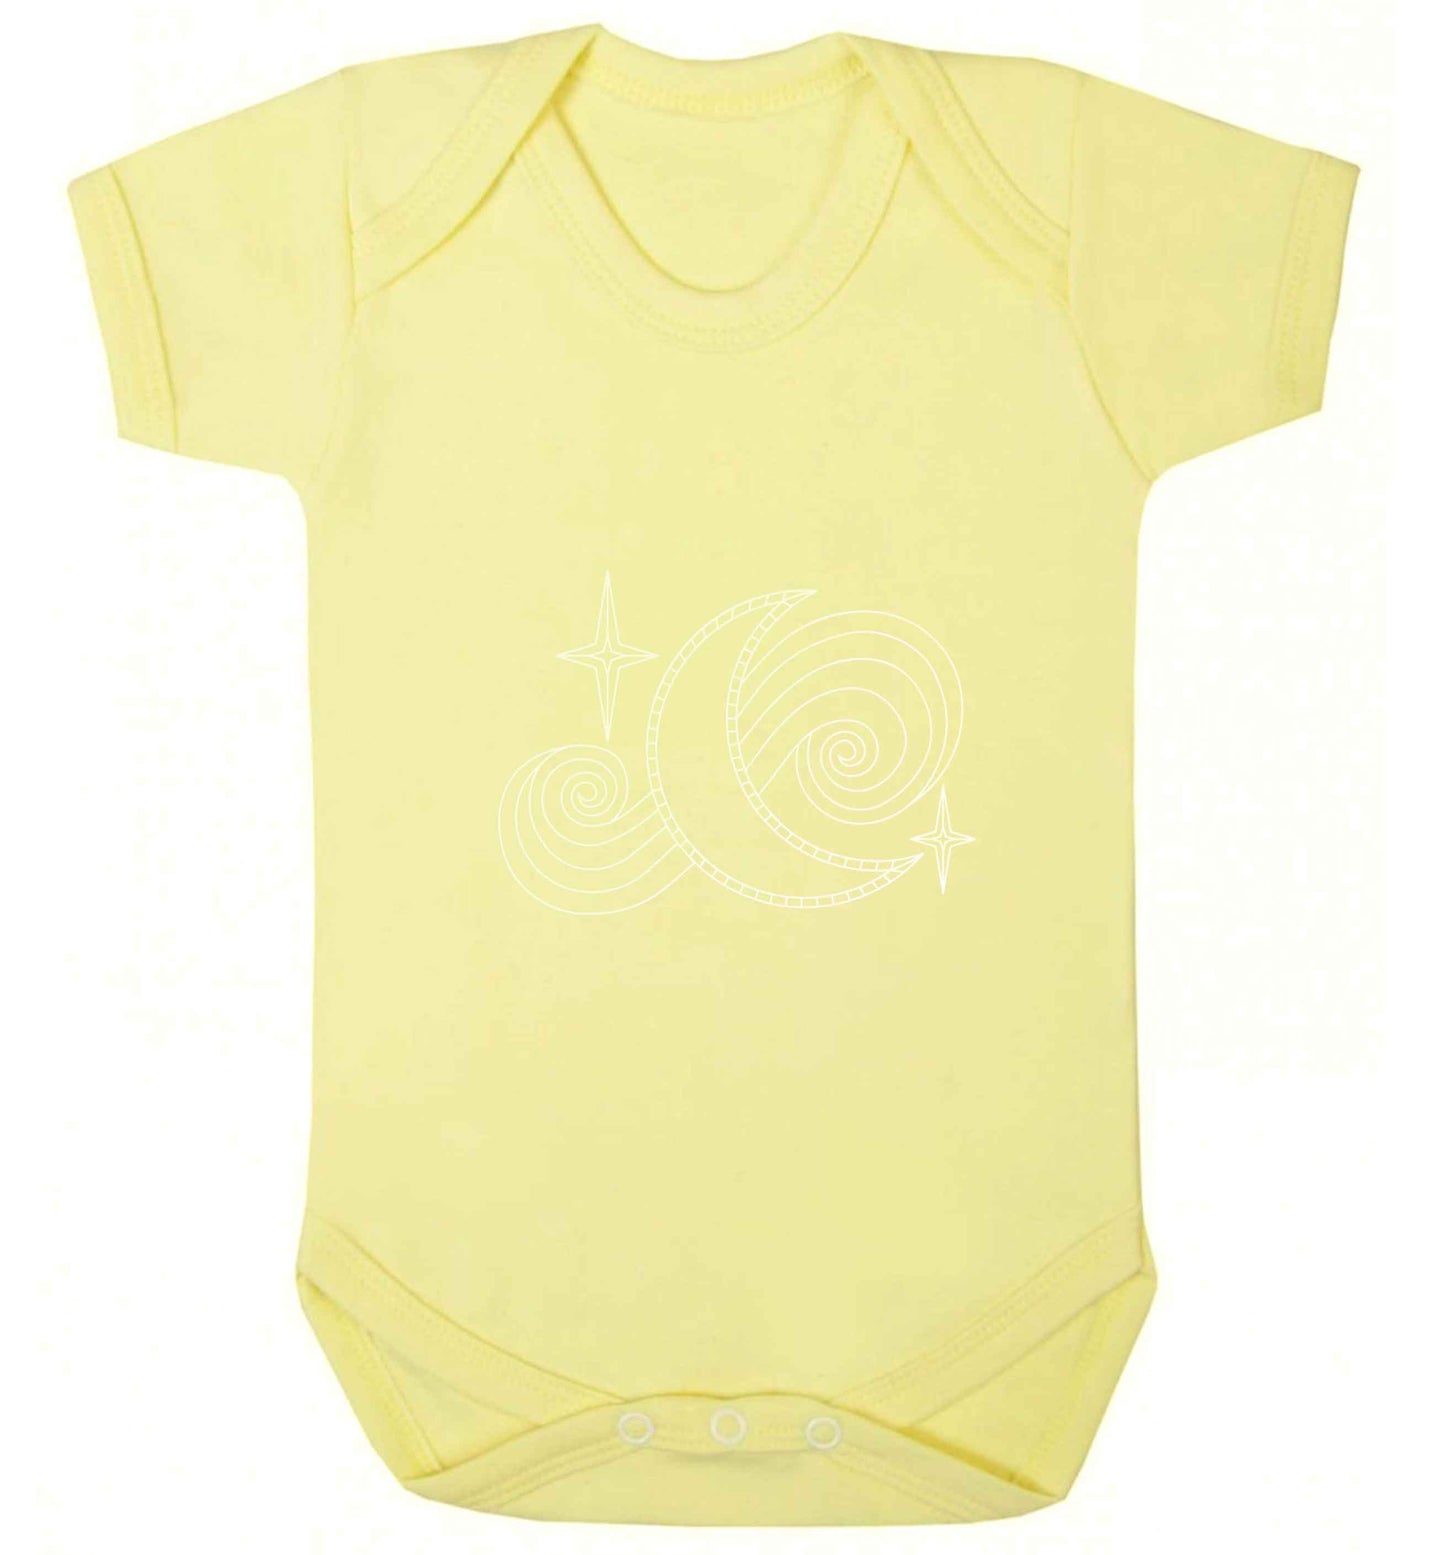 Moon and stars illustration baby vest pale yellow 18-24 months